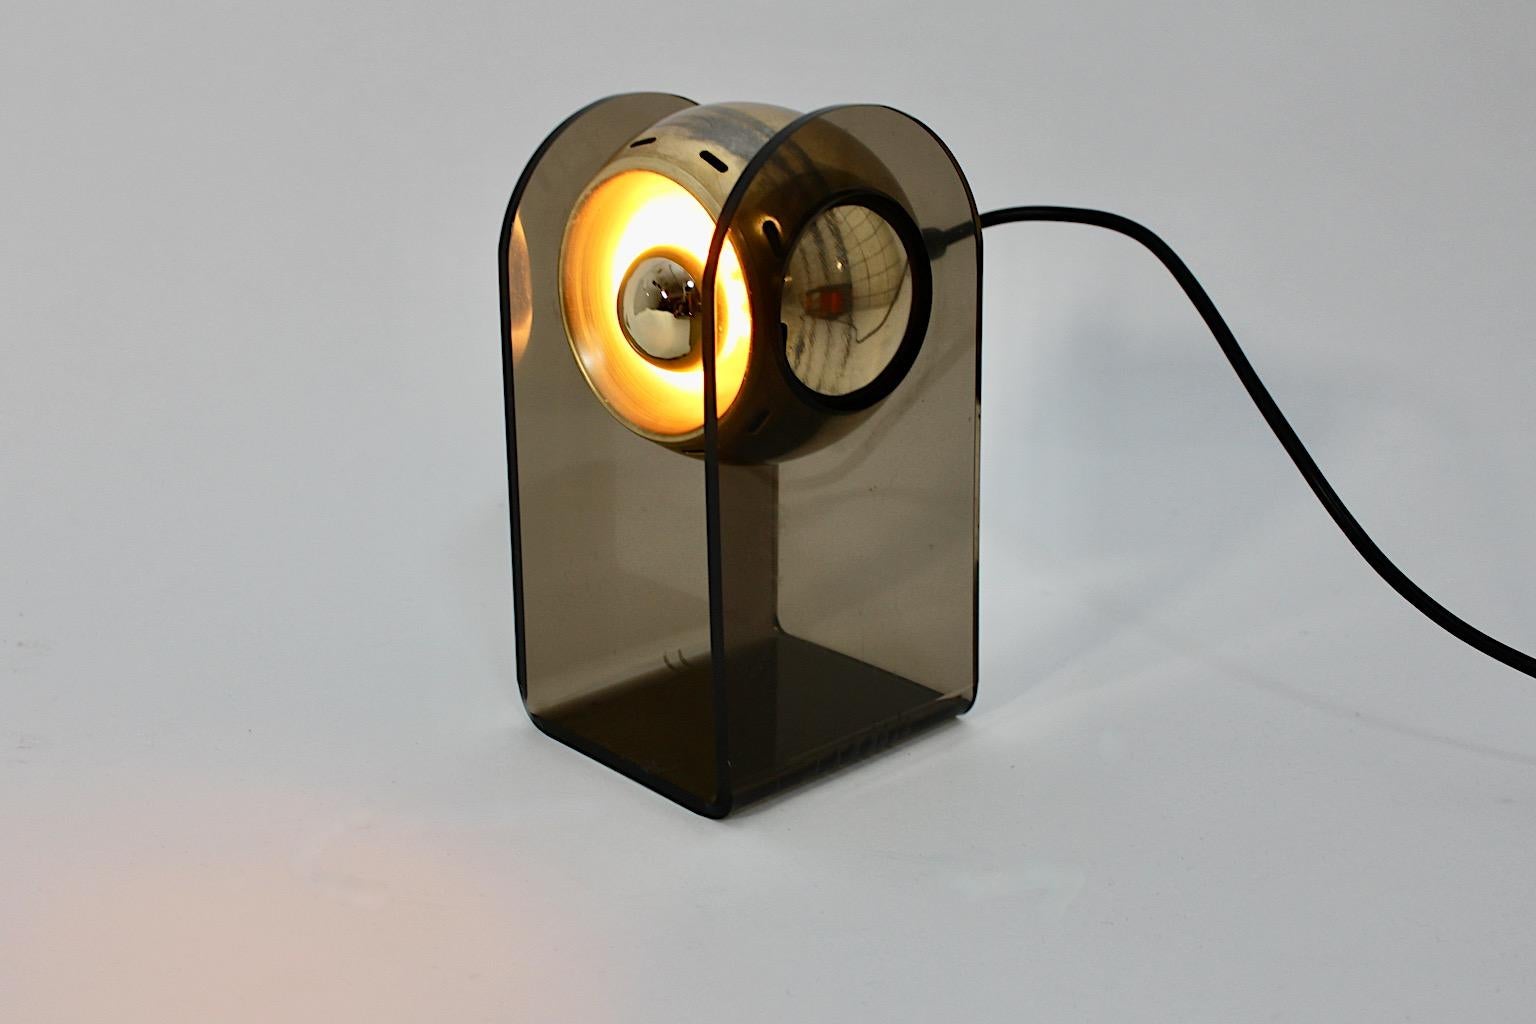 Space Age vintage table lamp from plexiglass and brass by Gino Sarfatti for Arteluce, Italy 1968.
An iconic table lamp designed by Gino Sarfatti for Arteluce 1968 from smoked lucite and brass.
This table lamp features a smoked lucite frame with a